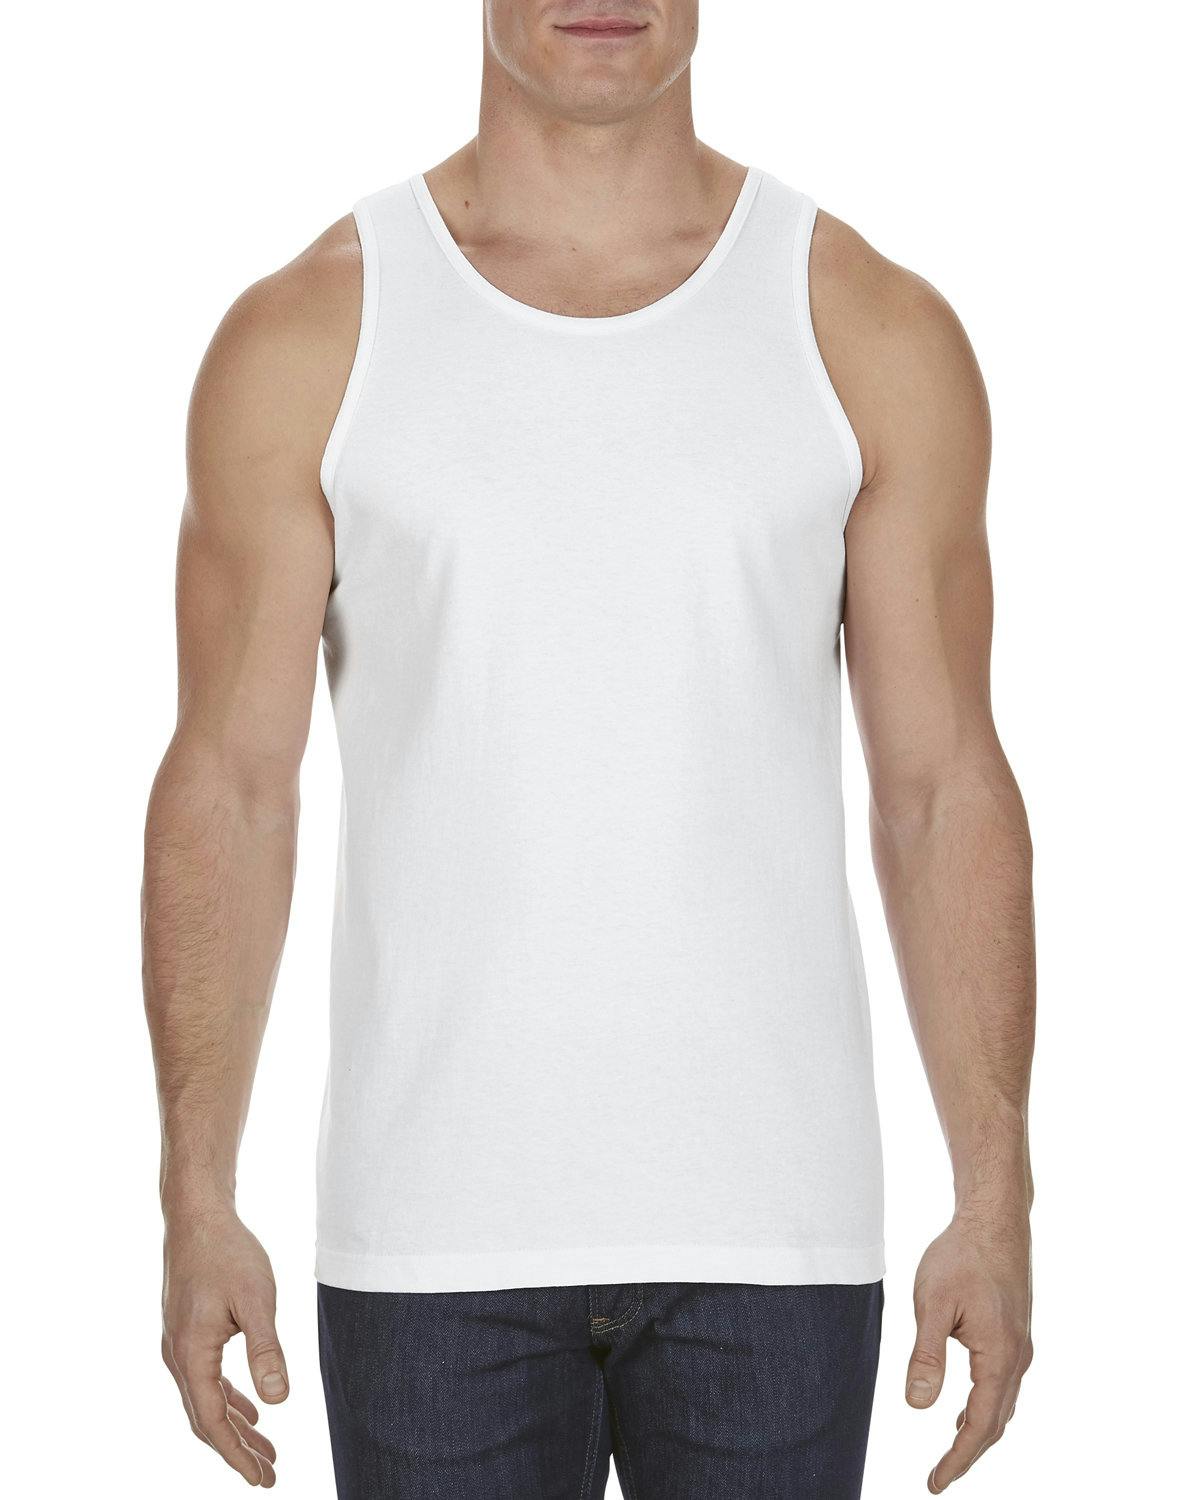 Image for Adult 6.0 oz., 100% Cotton Tank Top